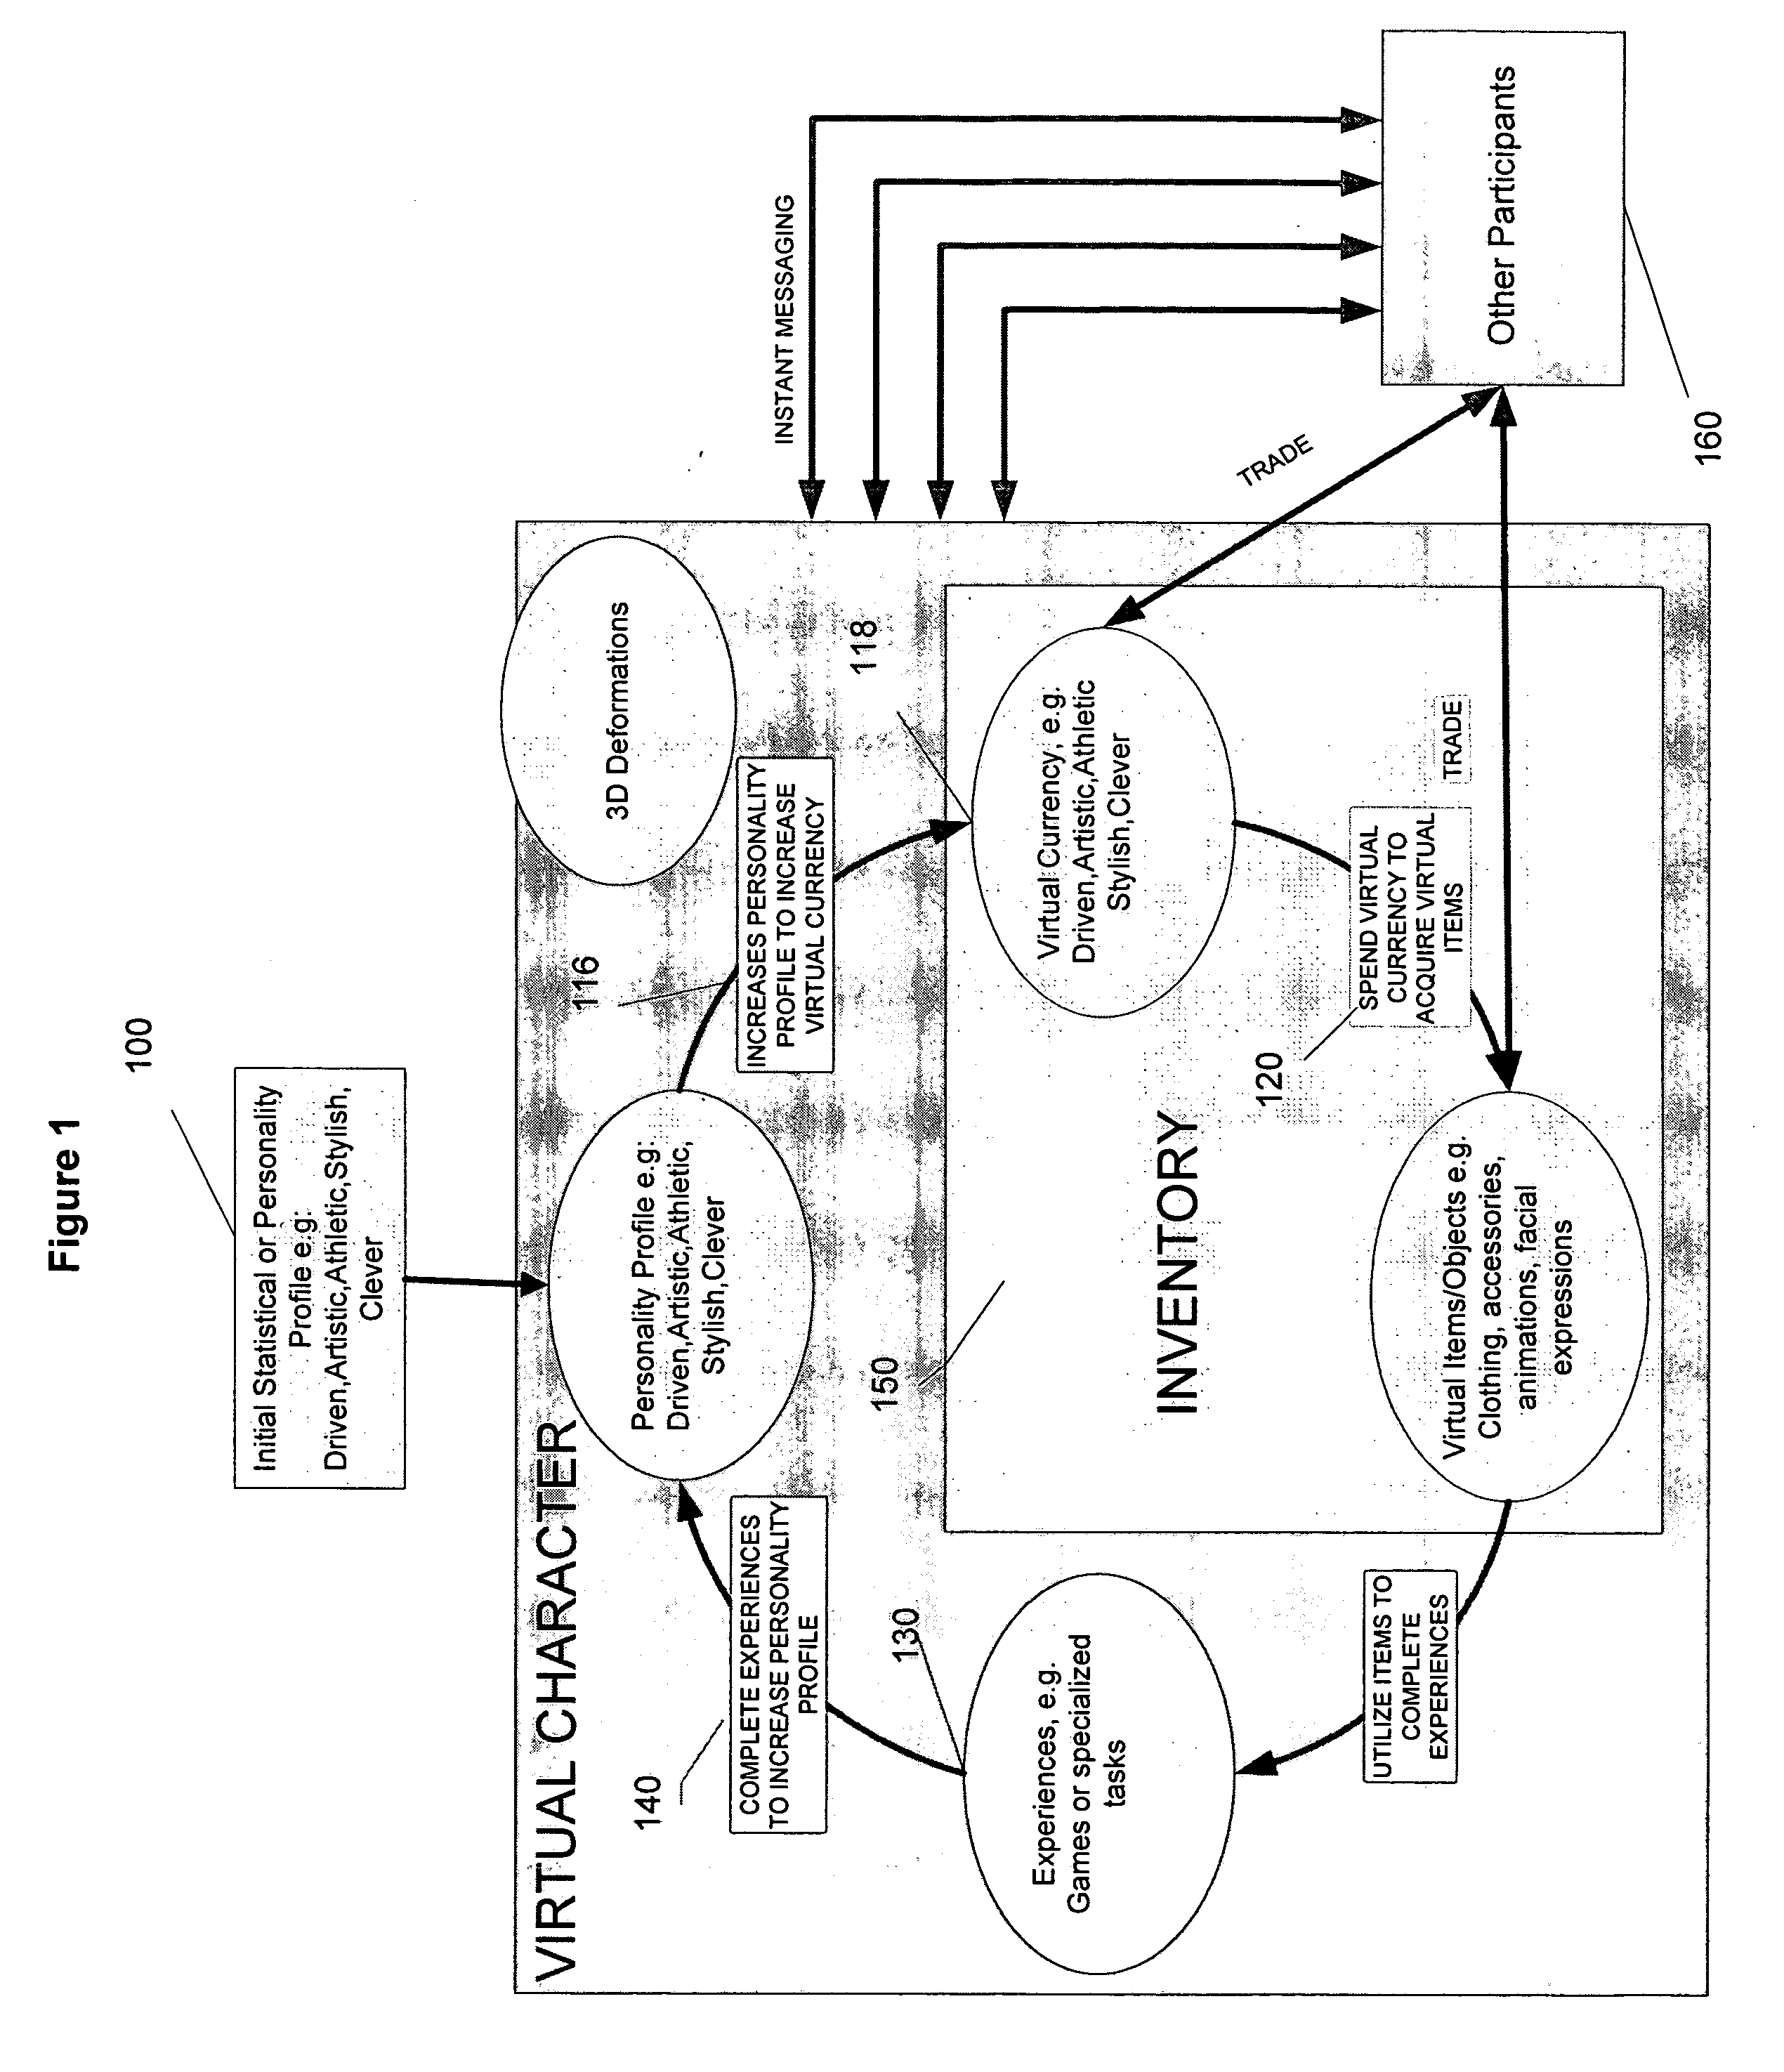 Systems and methods for a role-playing game having a customizable avatar and differentiated instant messaging environment